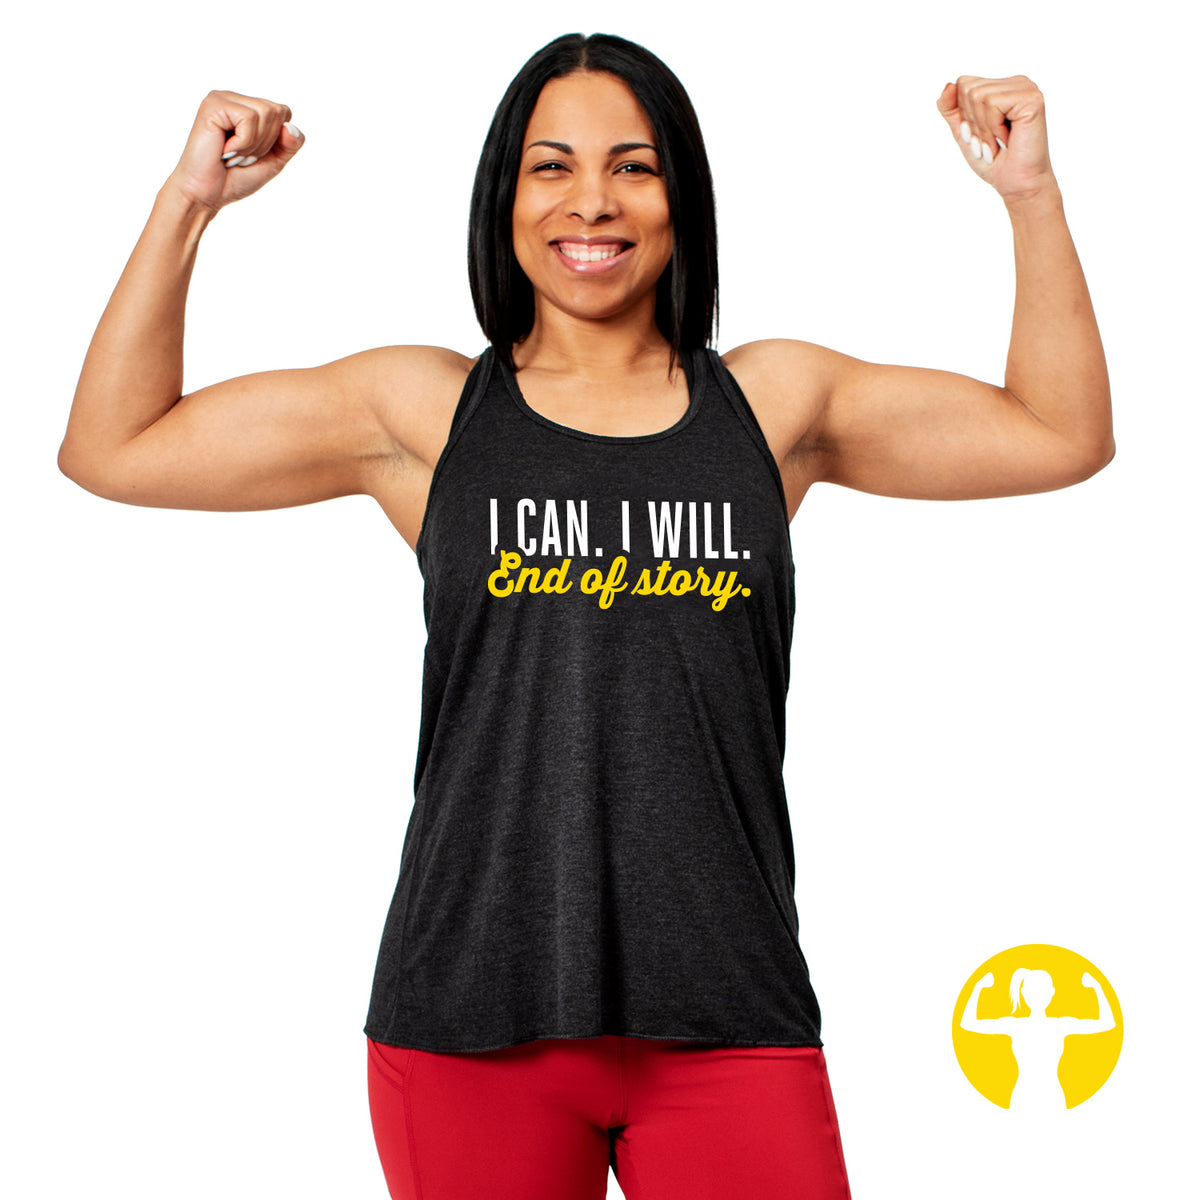 Just A Girl With Goals Workout Tank Fitness Tanks Racerback Gym